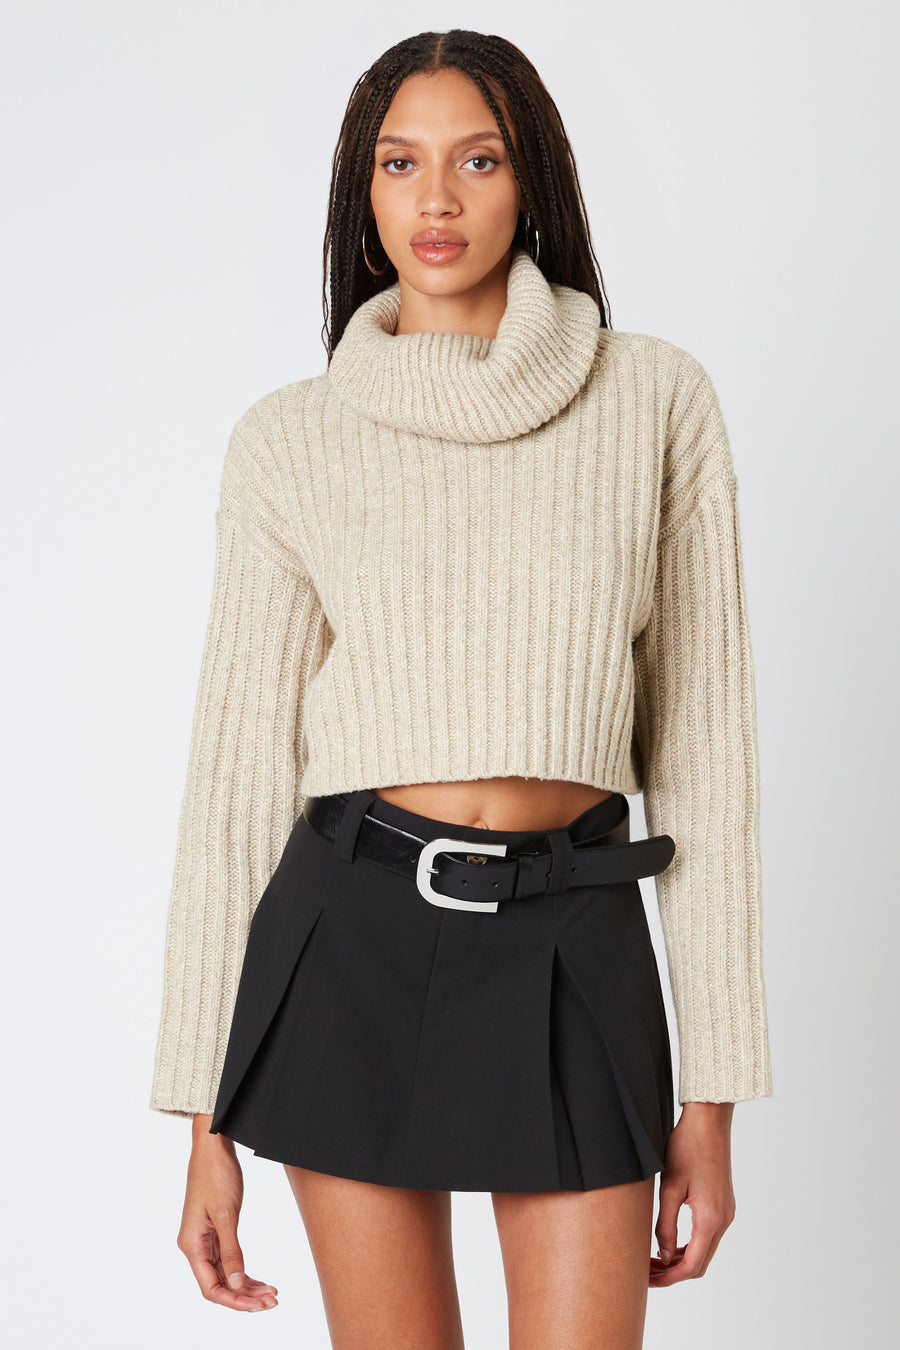 Flax colored cropped turtle neck. 